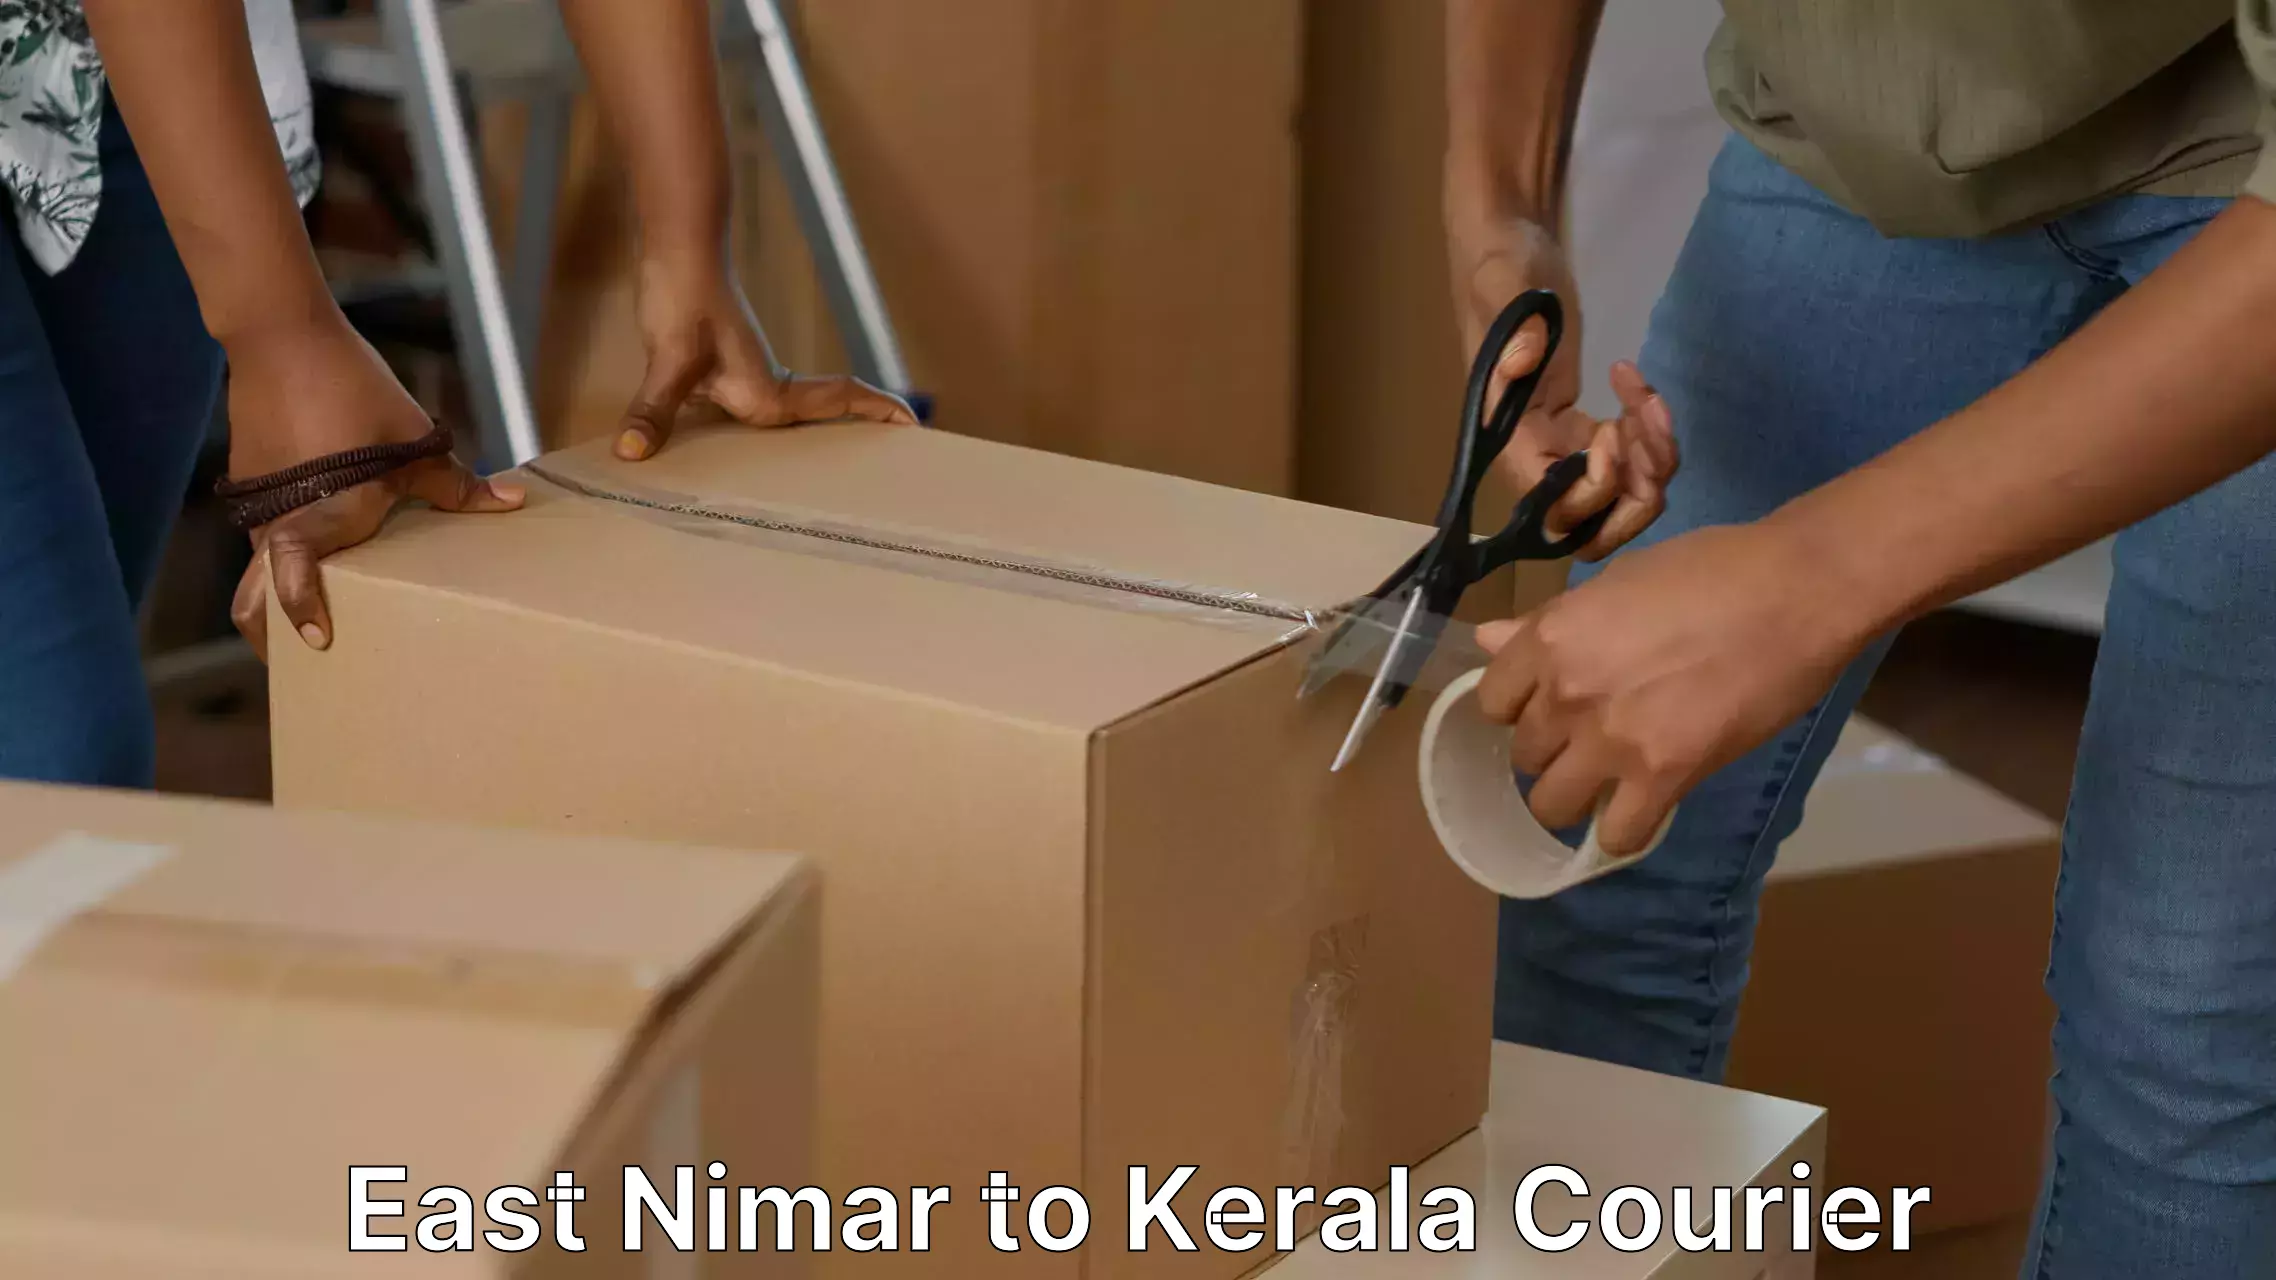 Professional moving assistance East Nimar to Kerala